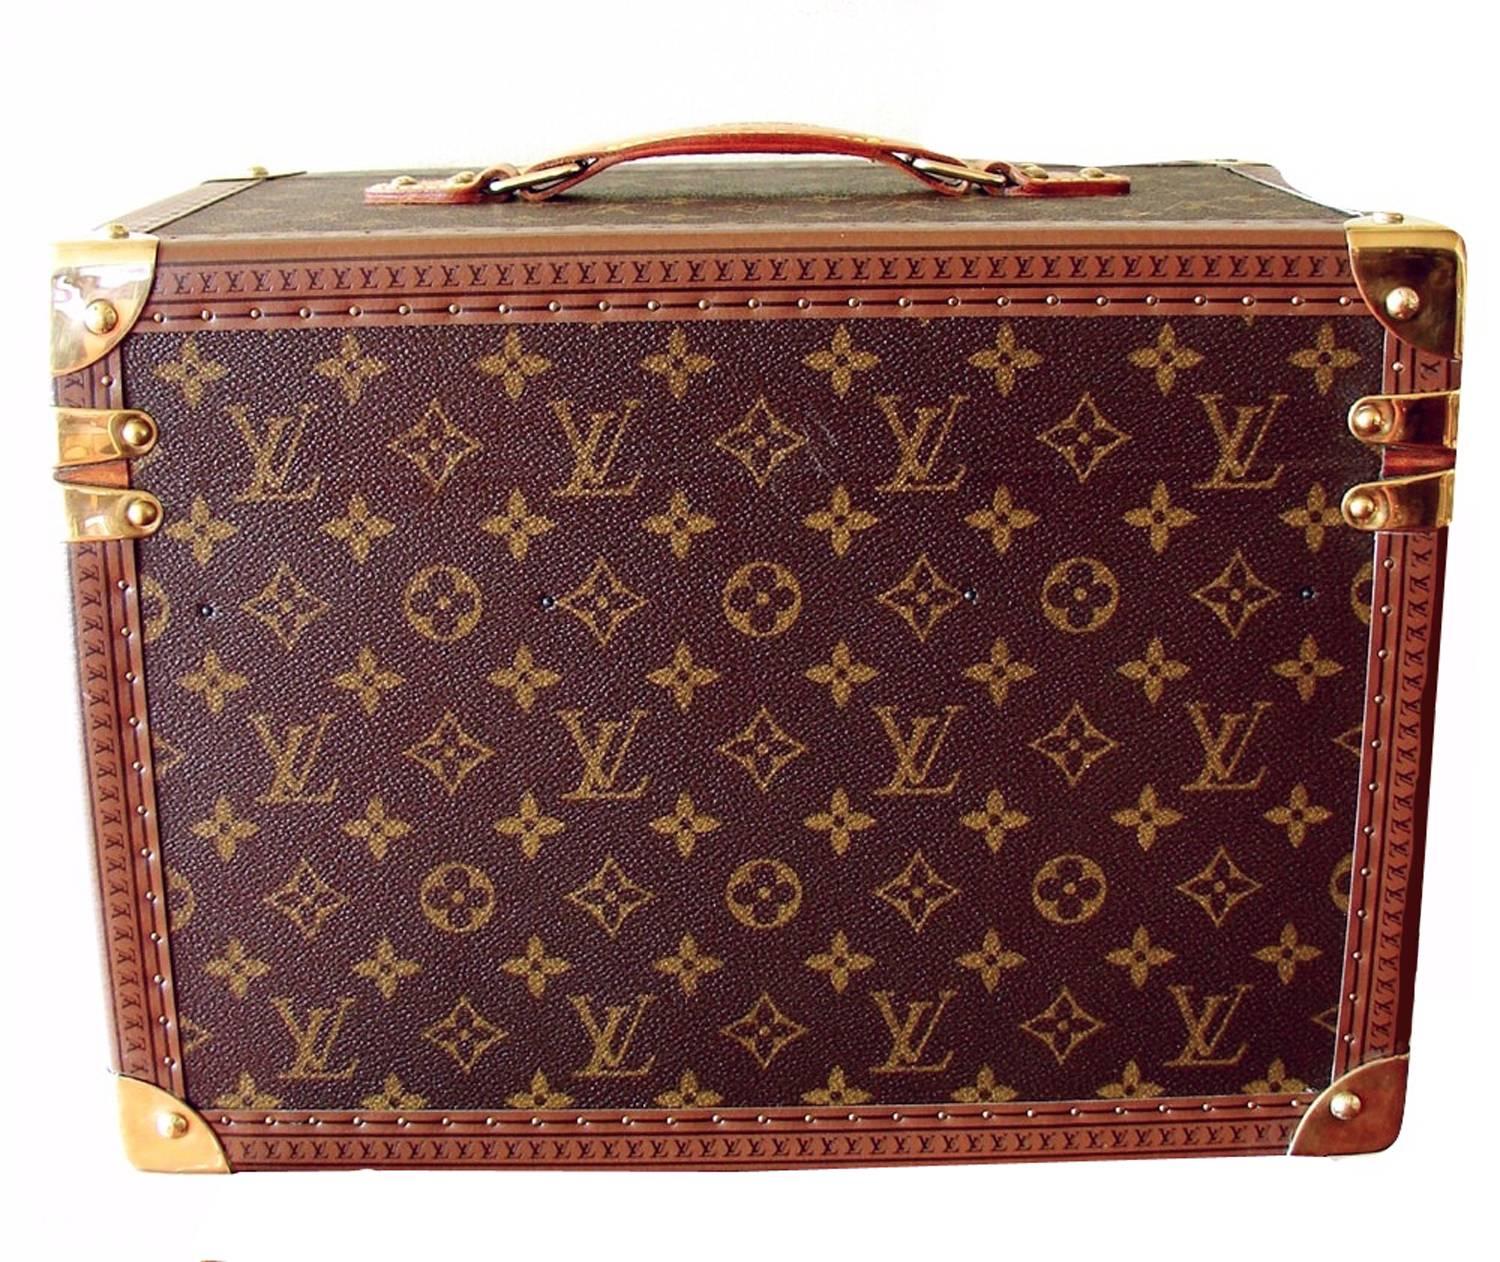 This Louis Vuitton monogram toiletry case is made from monogram canvas and is trimmed in vachetta leather.  Inside is lined in a cream leatherette fabric, and features a removable partition section with a leather bottle strap (with room for three